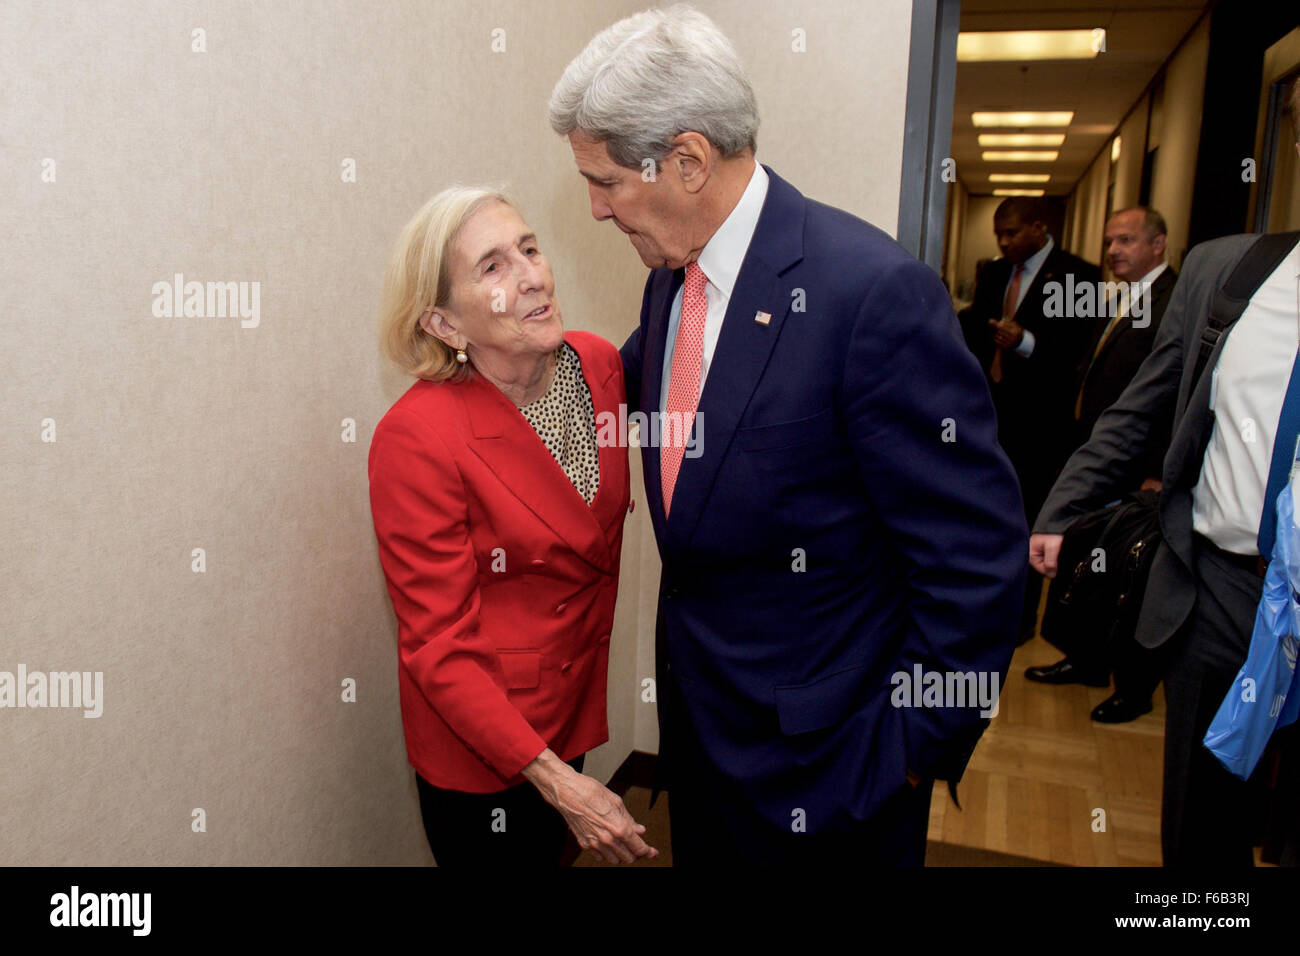 Secretary Kerry Greets Sister Before Ford Foundation Event in New York Stock Photo